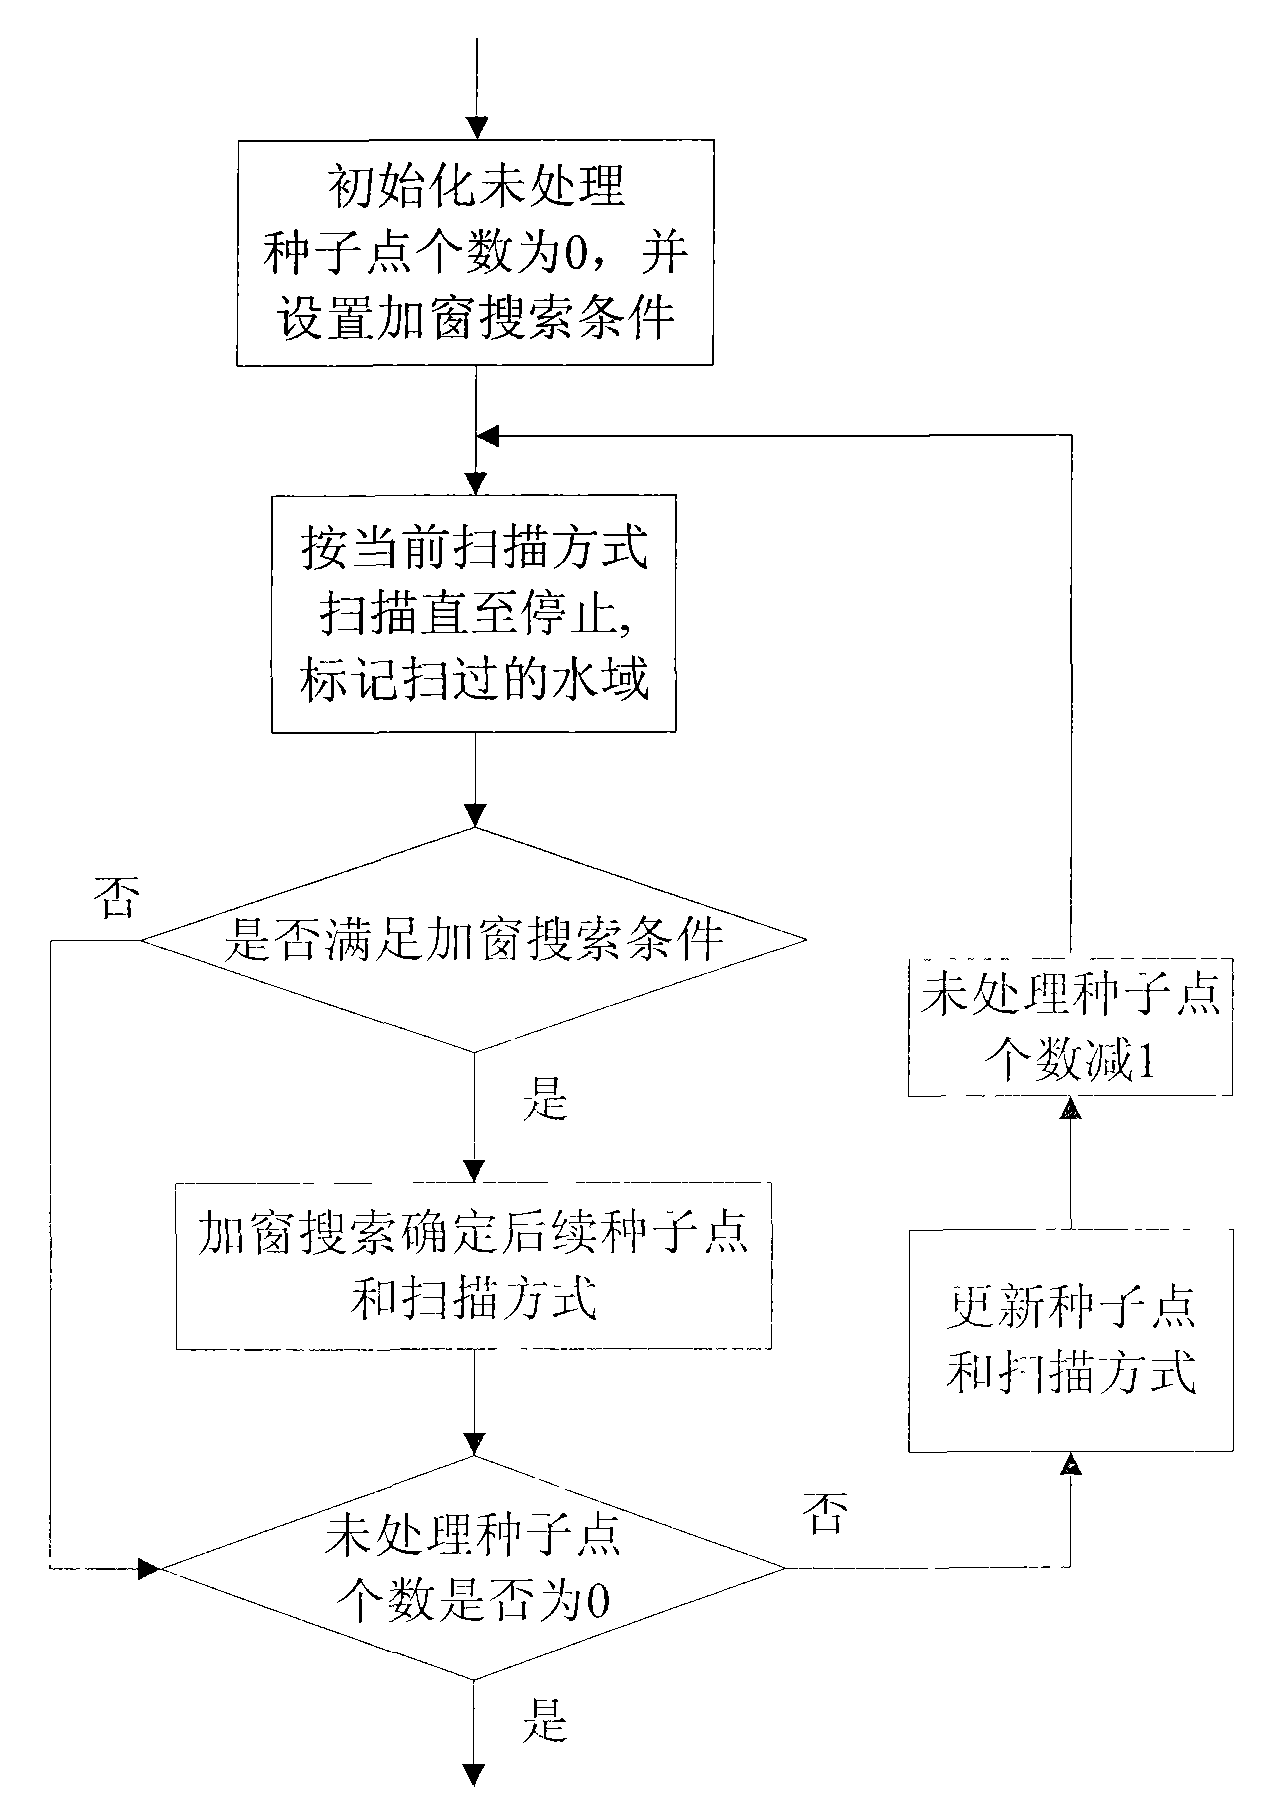 Method of quickly extracting rivers from remote sensing image